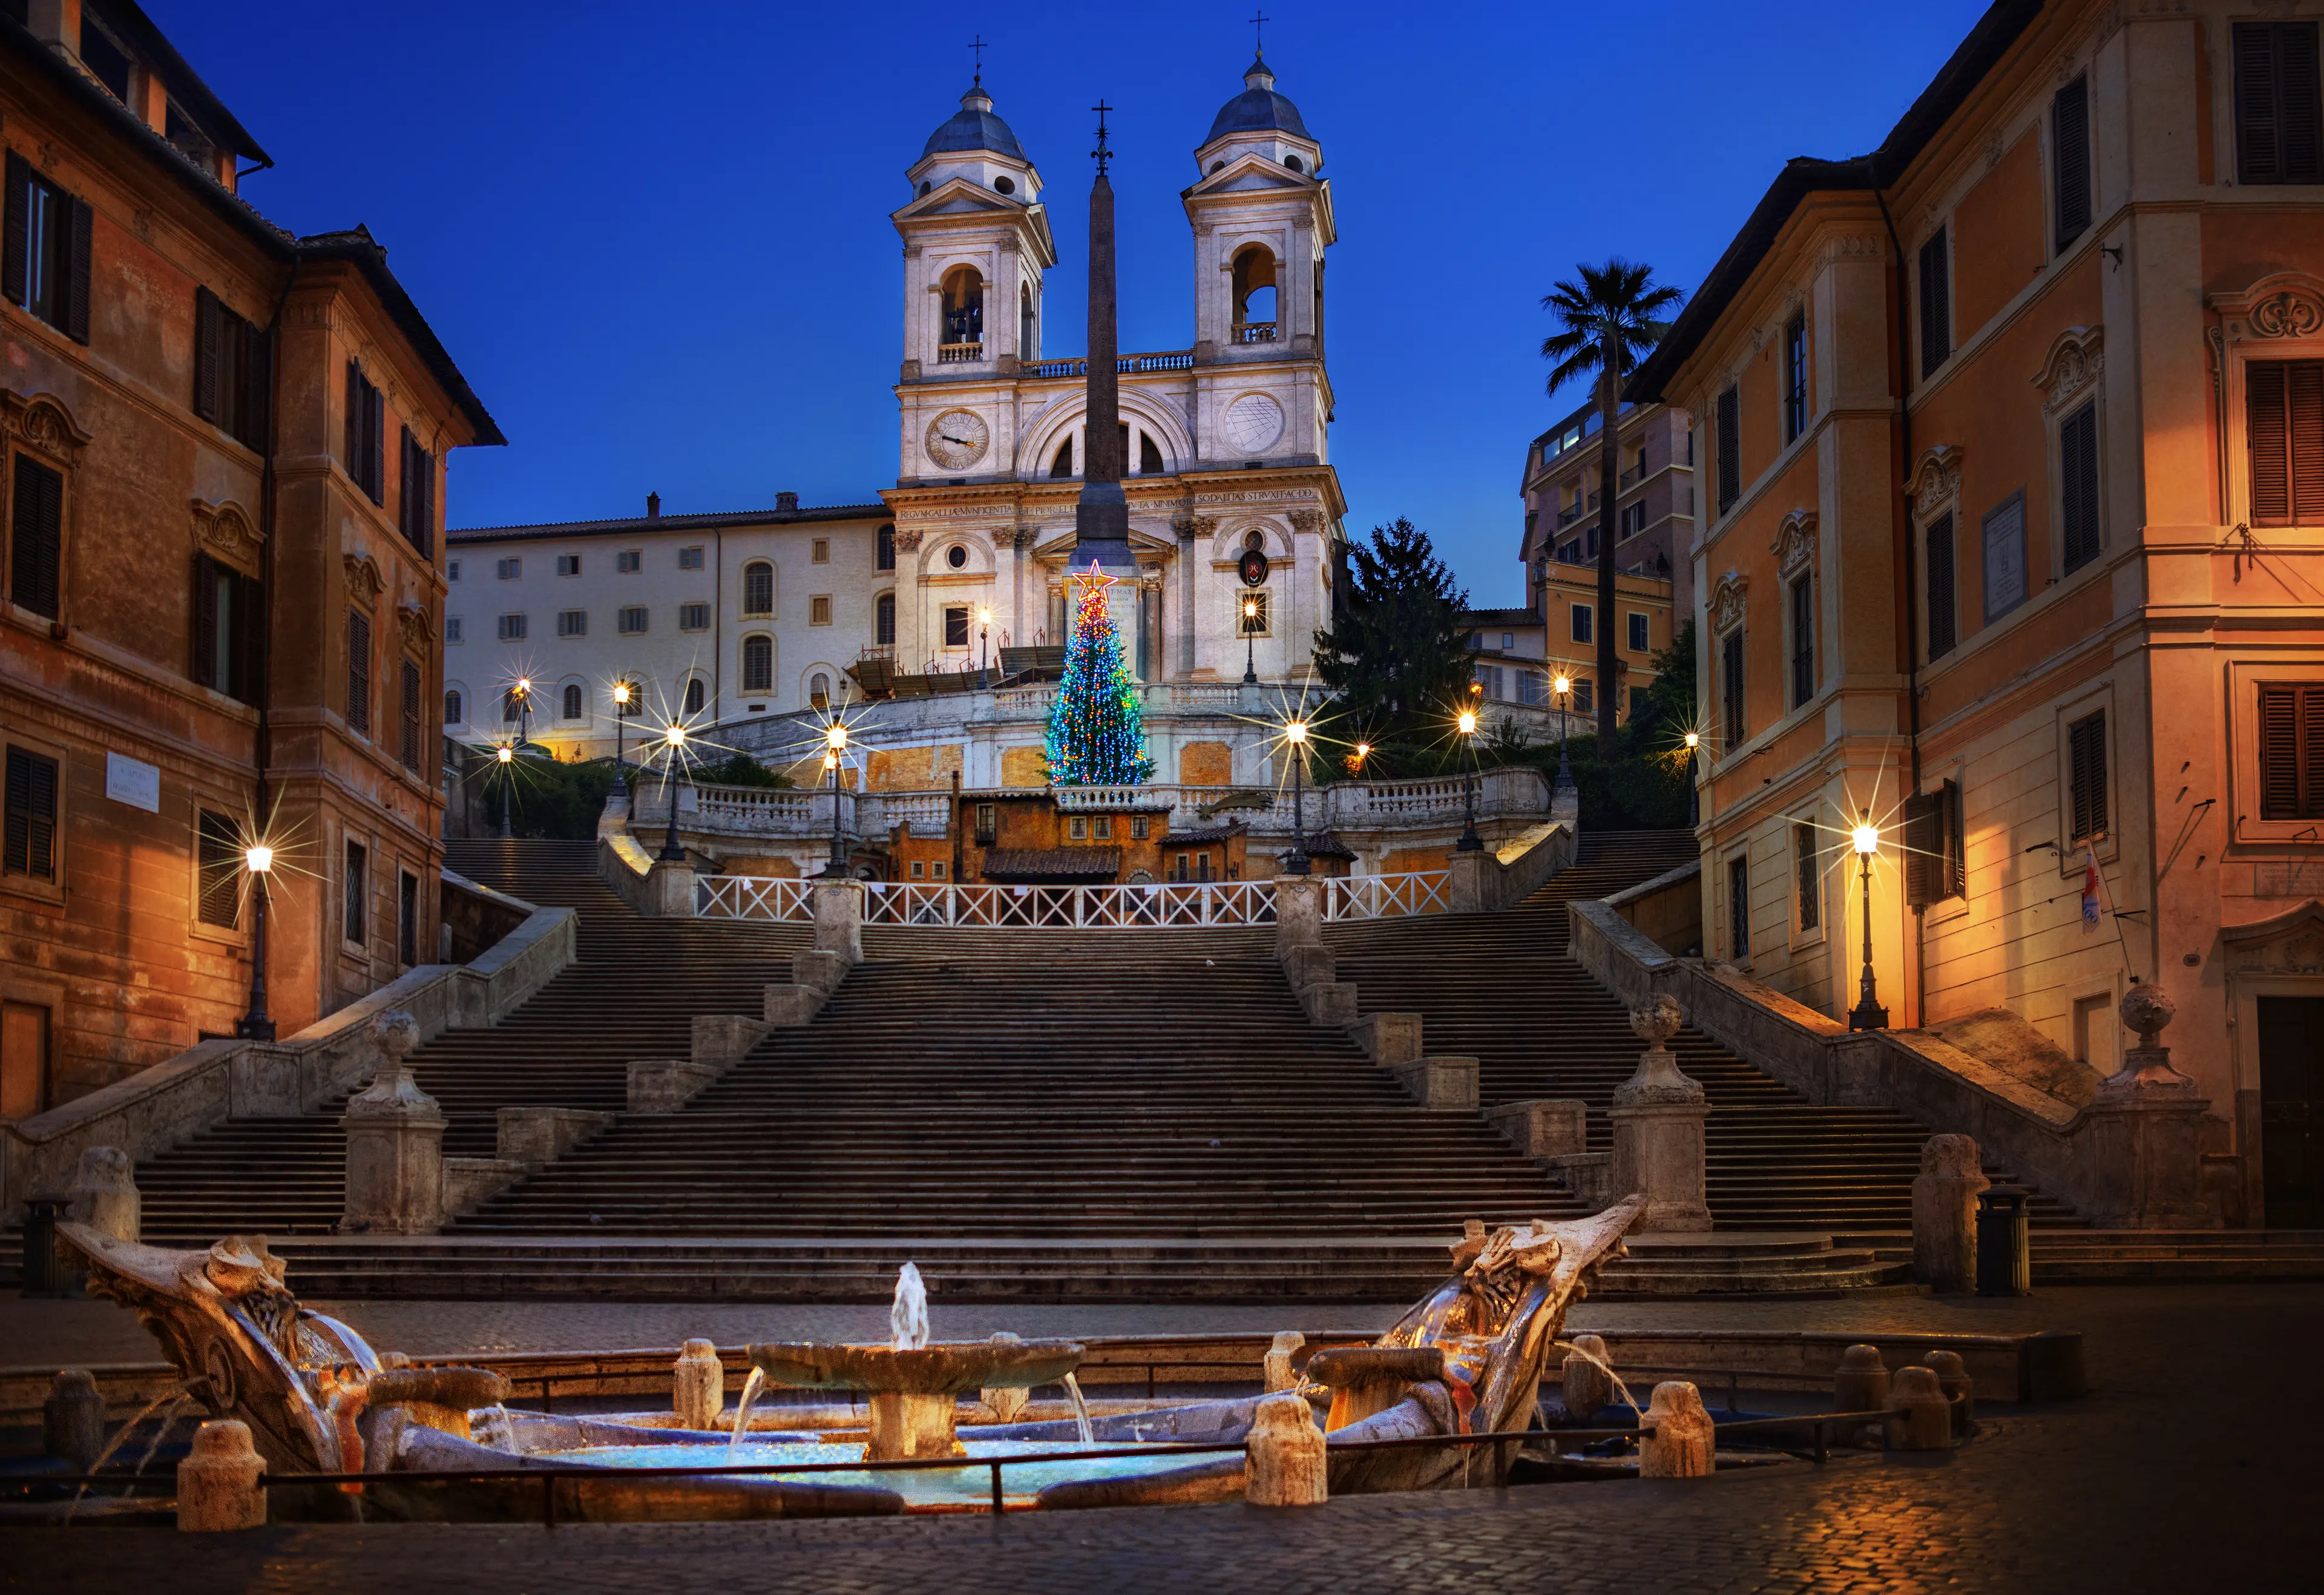 5-Day Family Christmas Holiday Itinerary in Rome, Italy